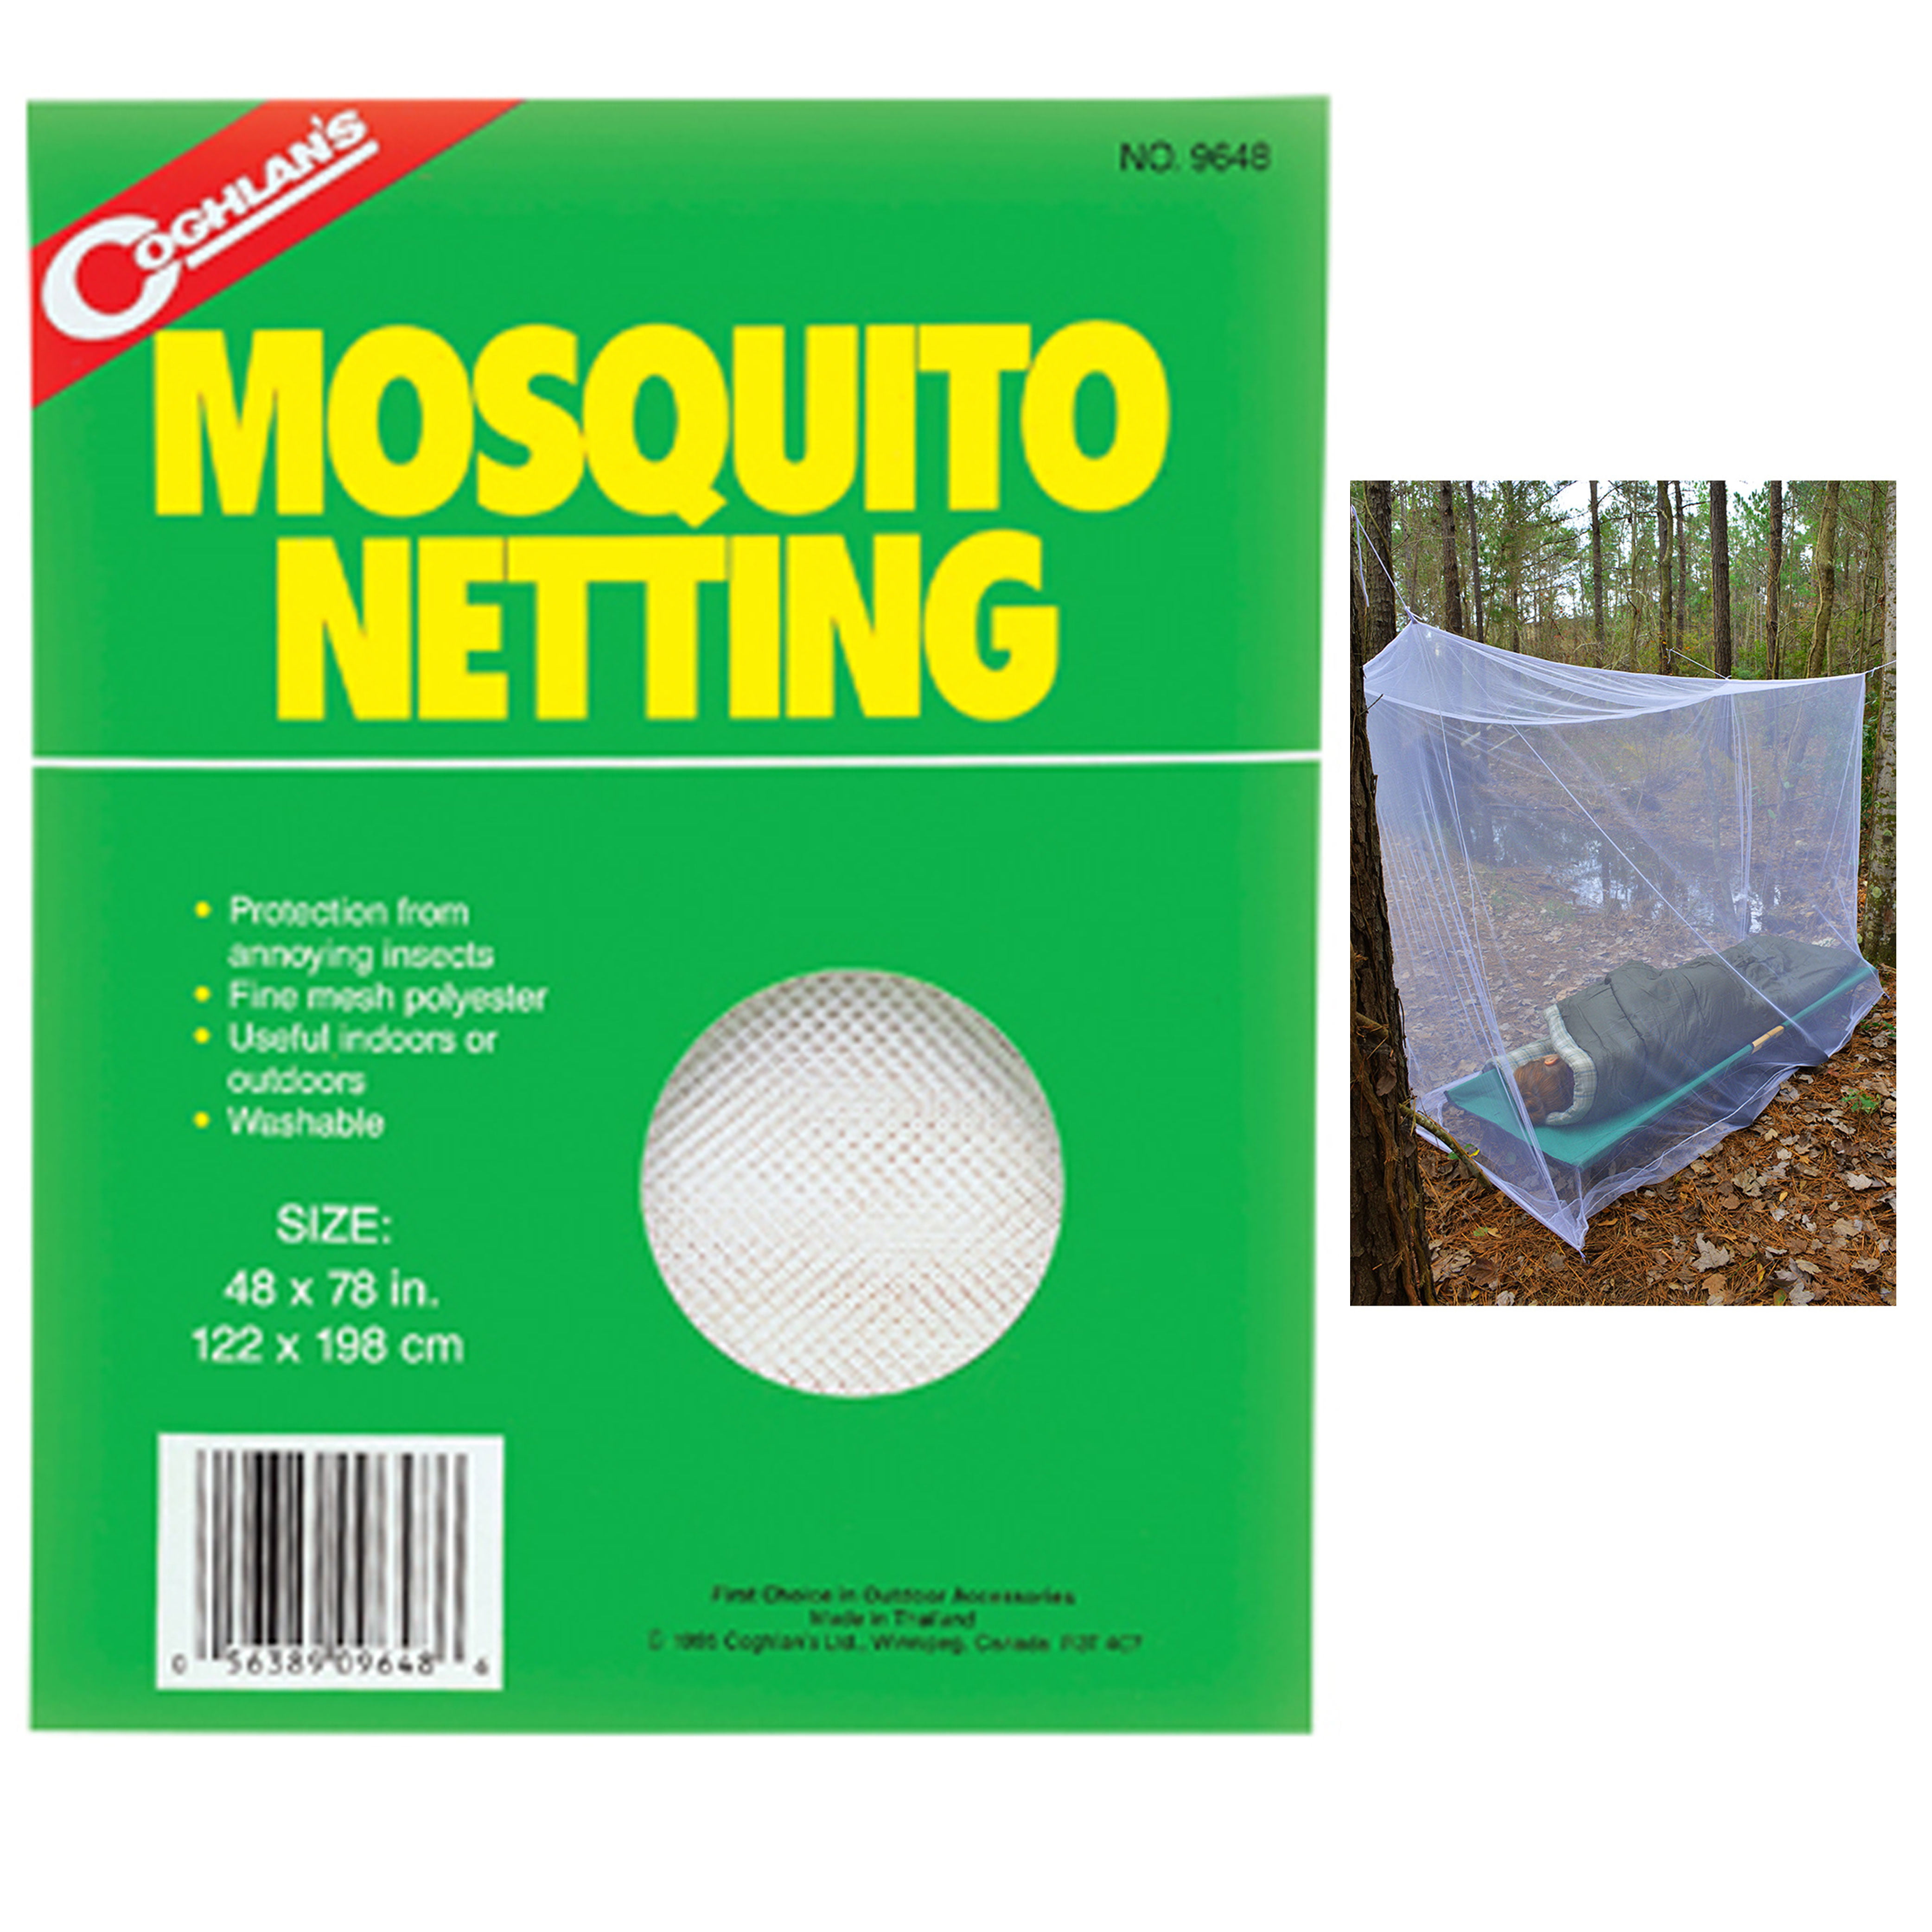 Details about   Large Camping Mosquito Net Indoor Outdoor Insect Netting L7J6 Storage White C4L8 